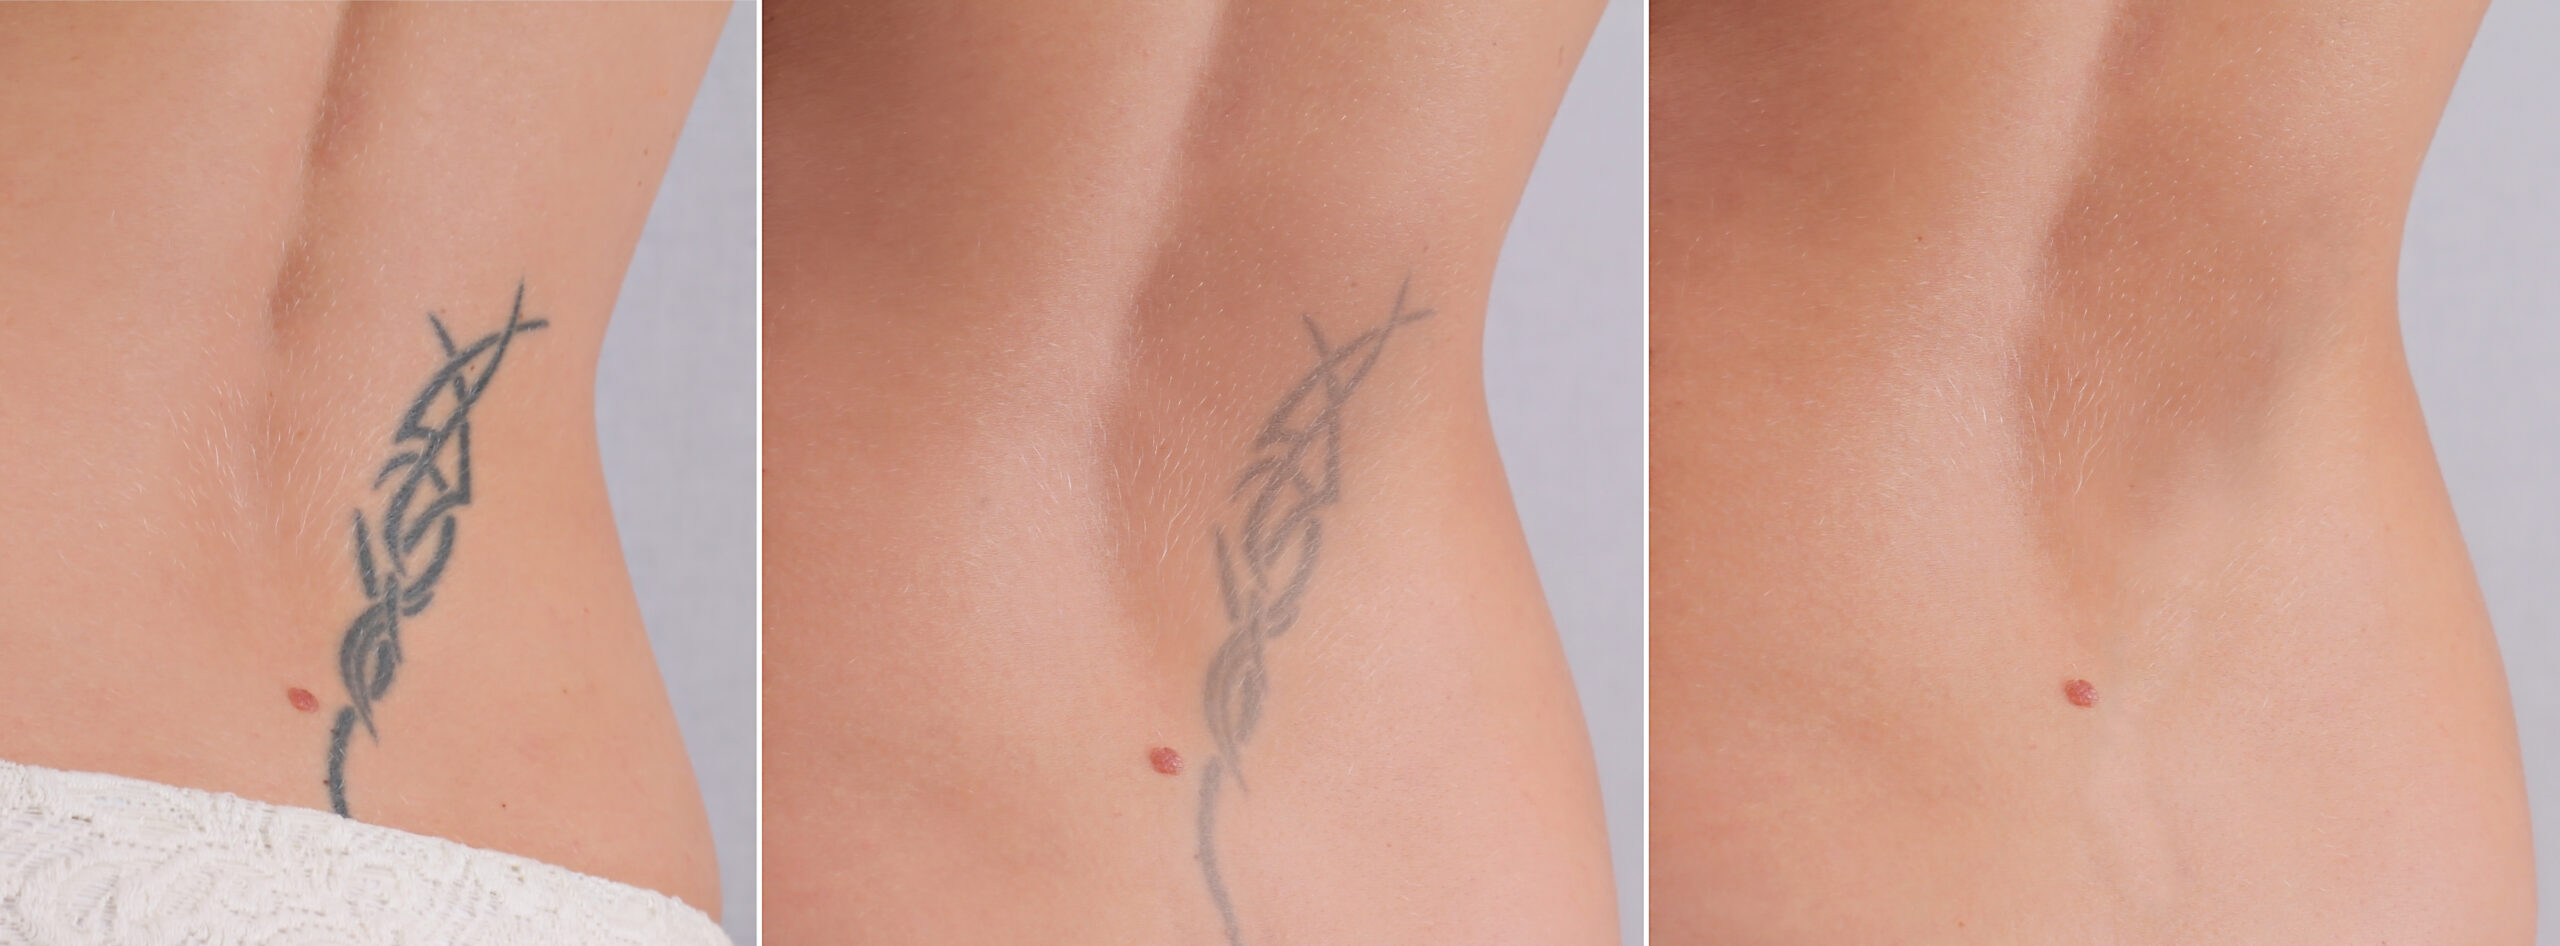 PAINLESS TATTOO REMOVAL  Canton MA Patch